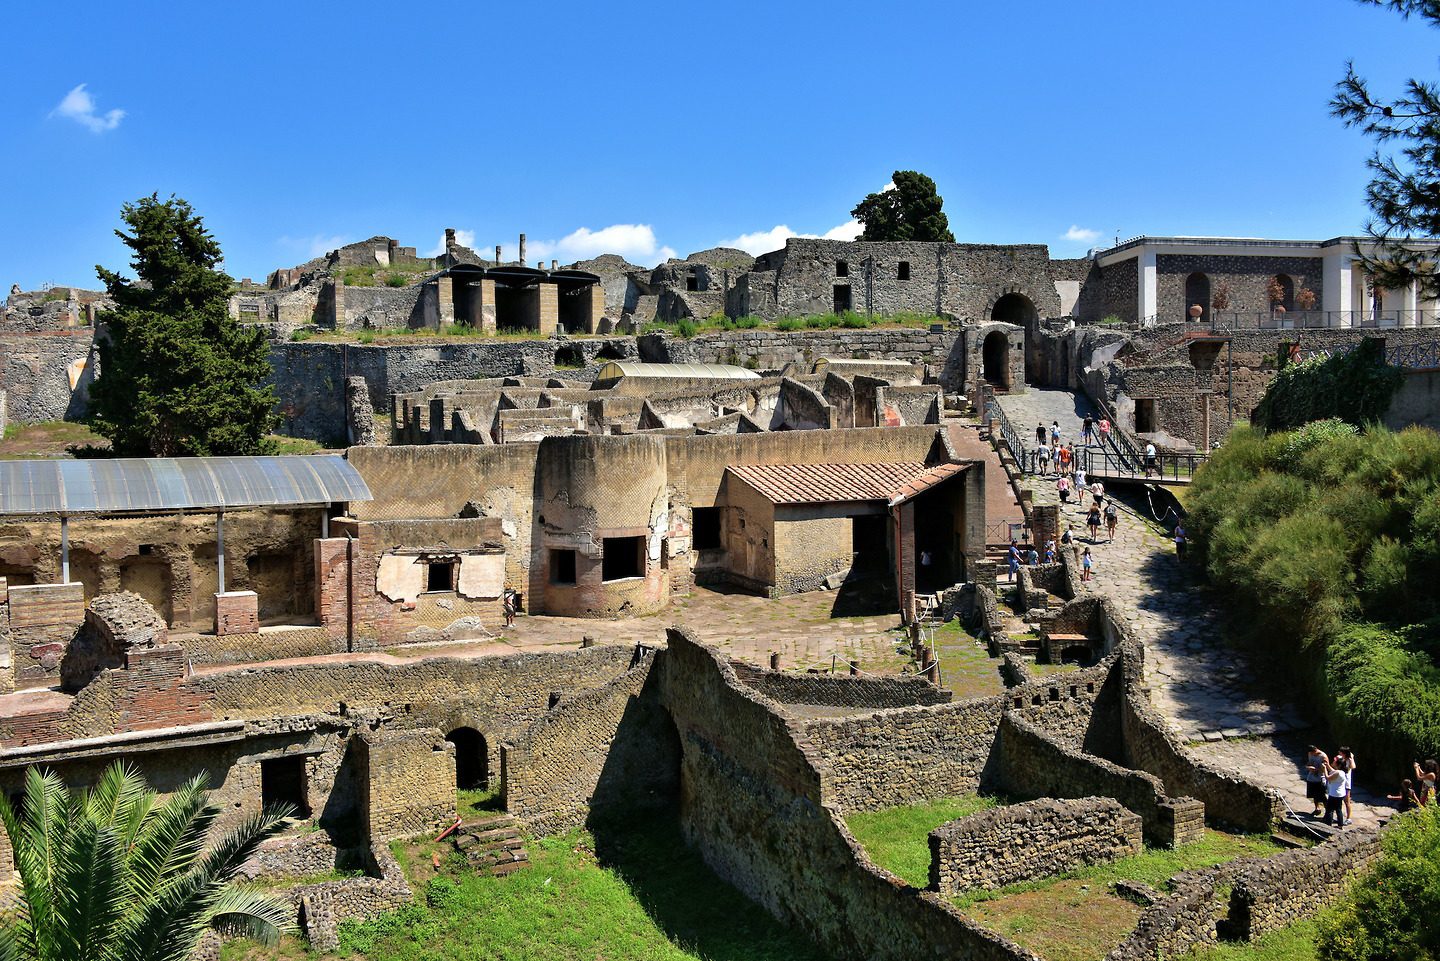 Where should you go when you’re in Pompeii?